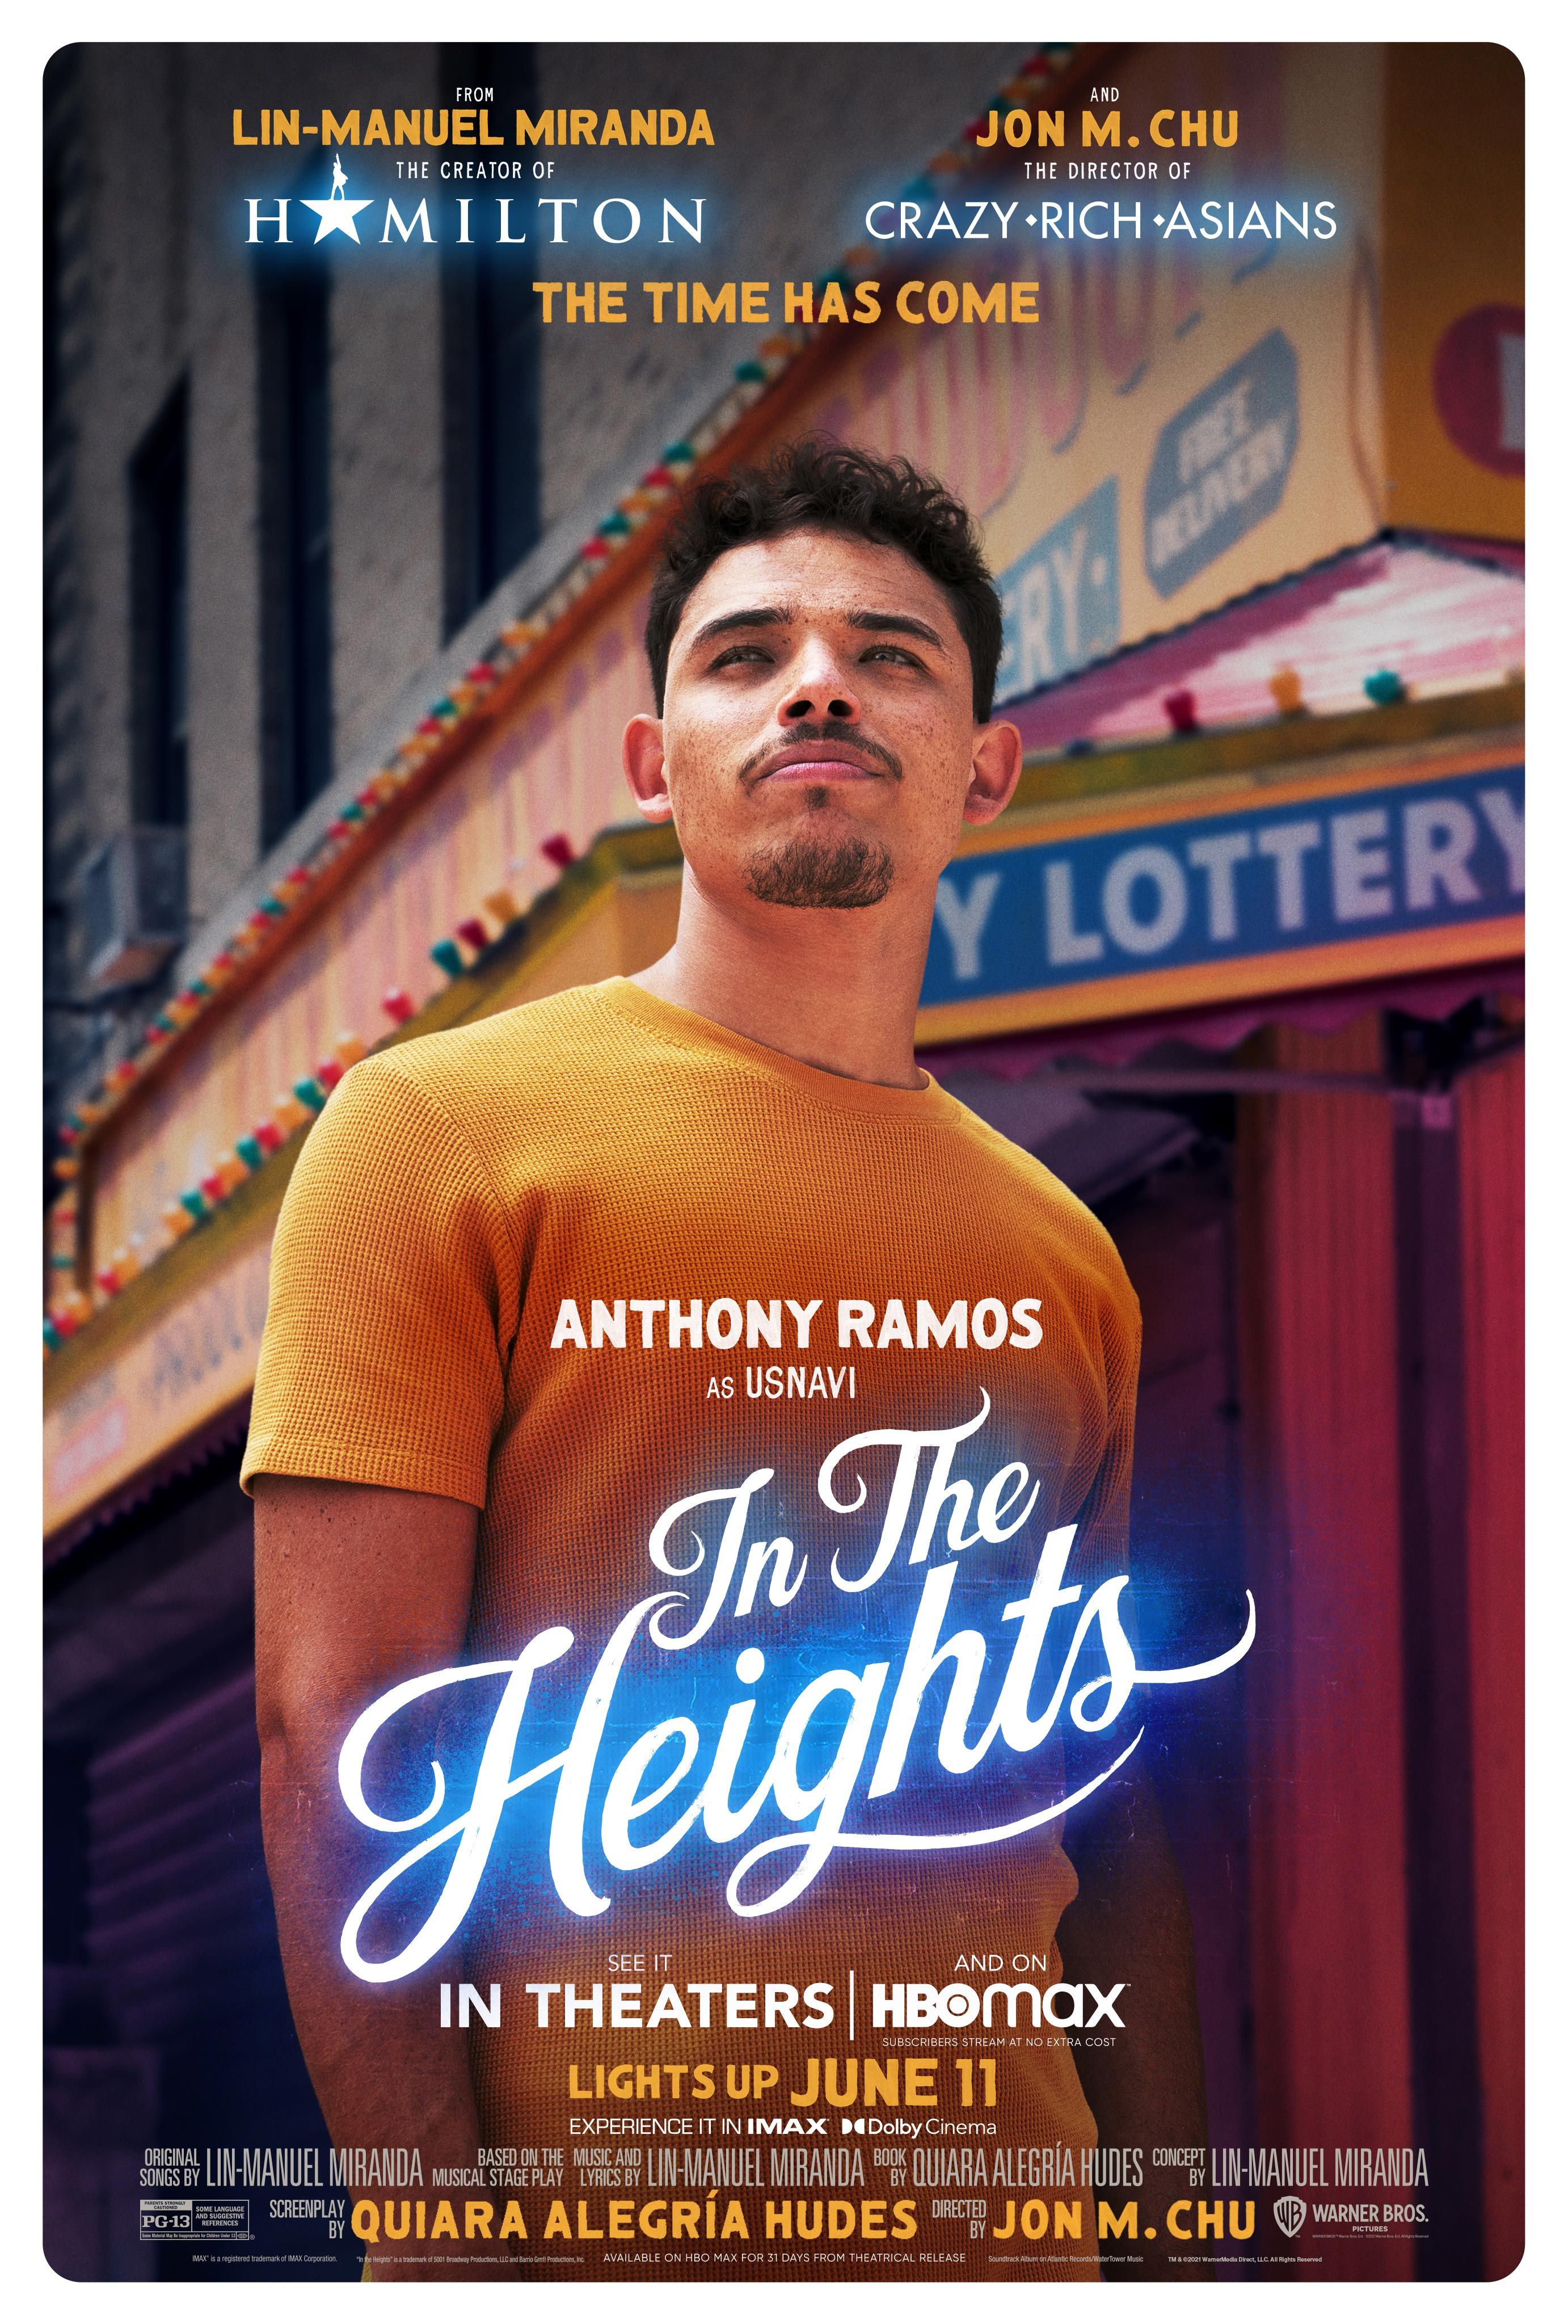 in the heights movie review essay